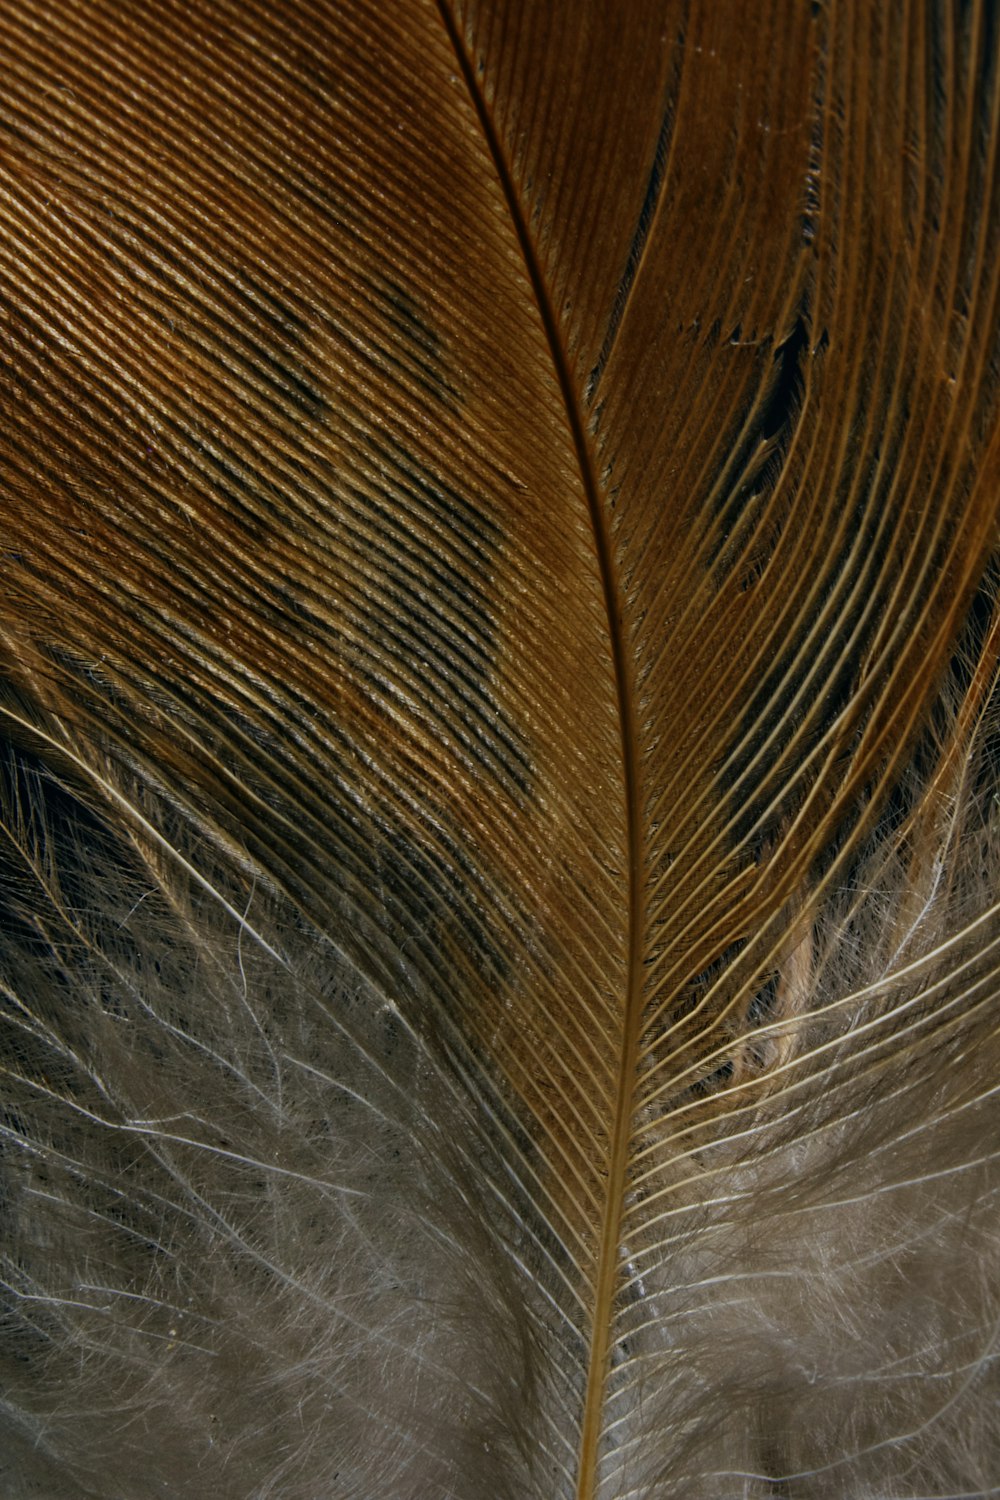 brown and white feather in close up photography